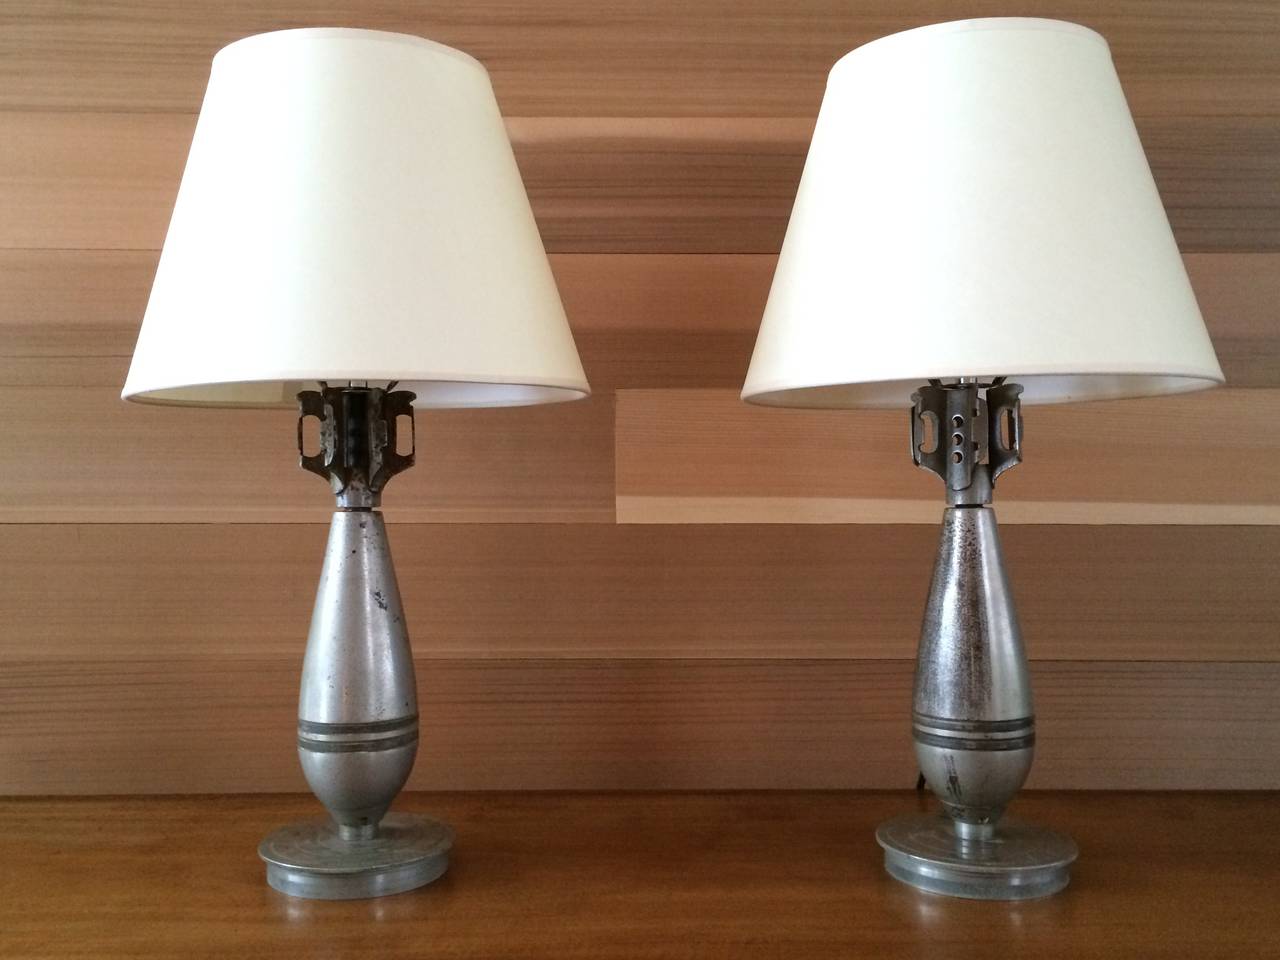 Art Deco Pair of M43 Bomb Table Lamps, 1940